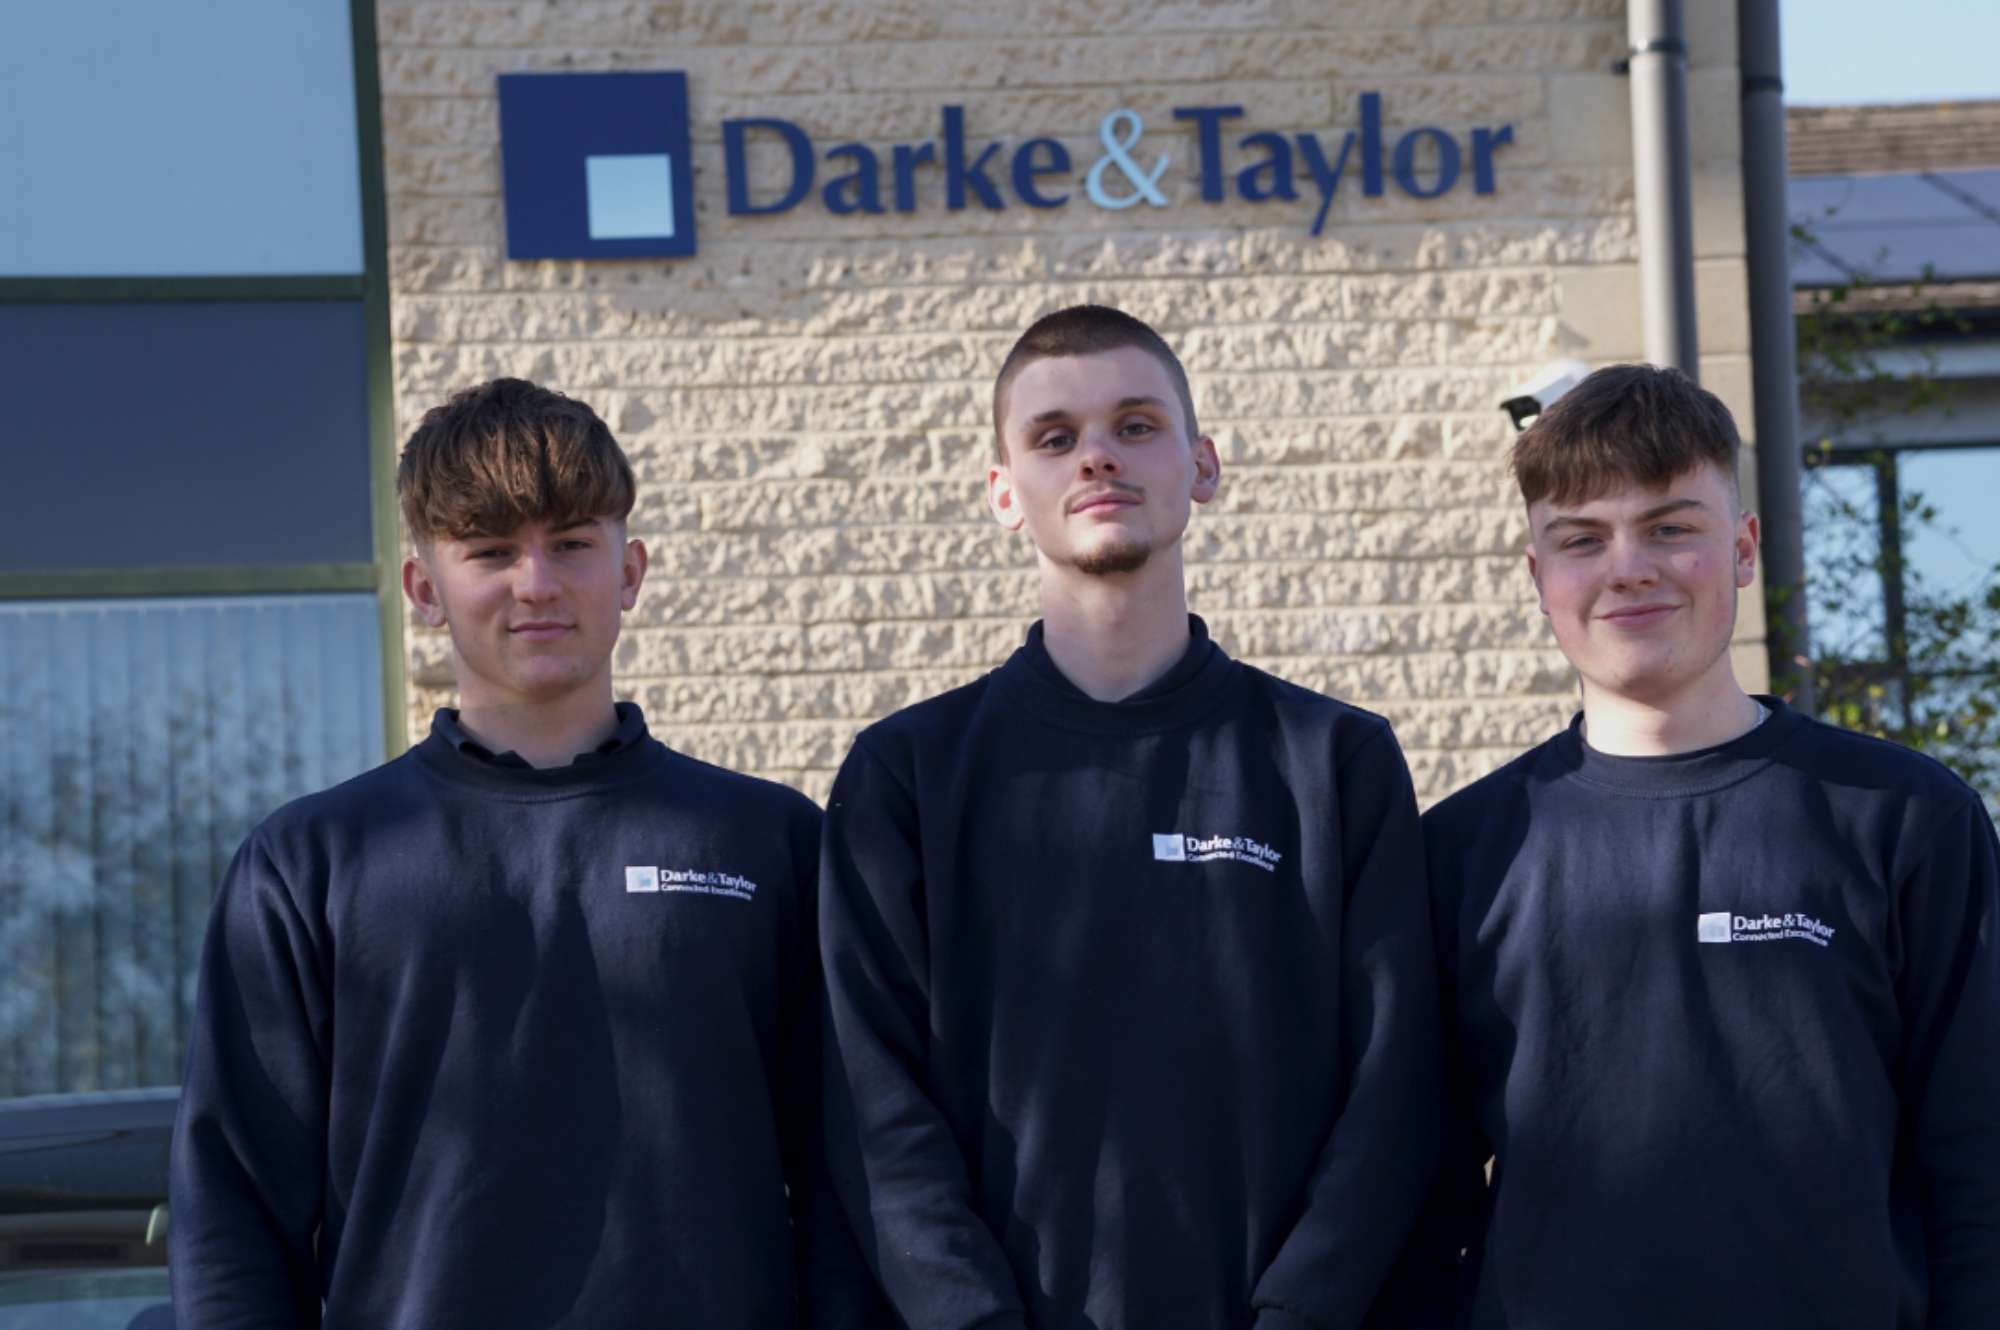 The start of something new: introducing our apprentice journey blog series